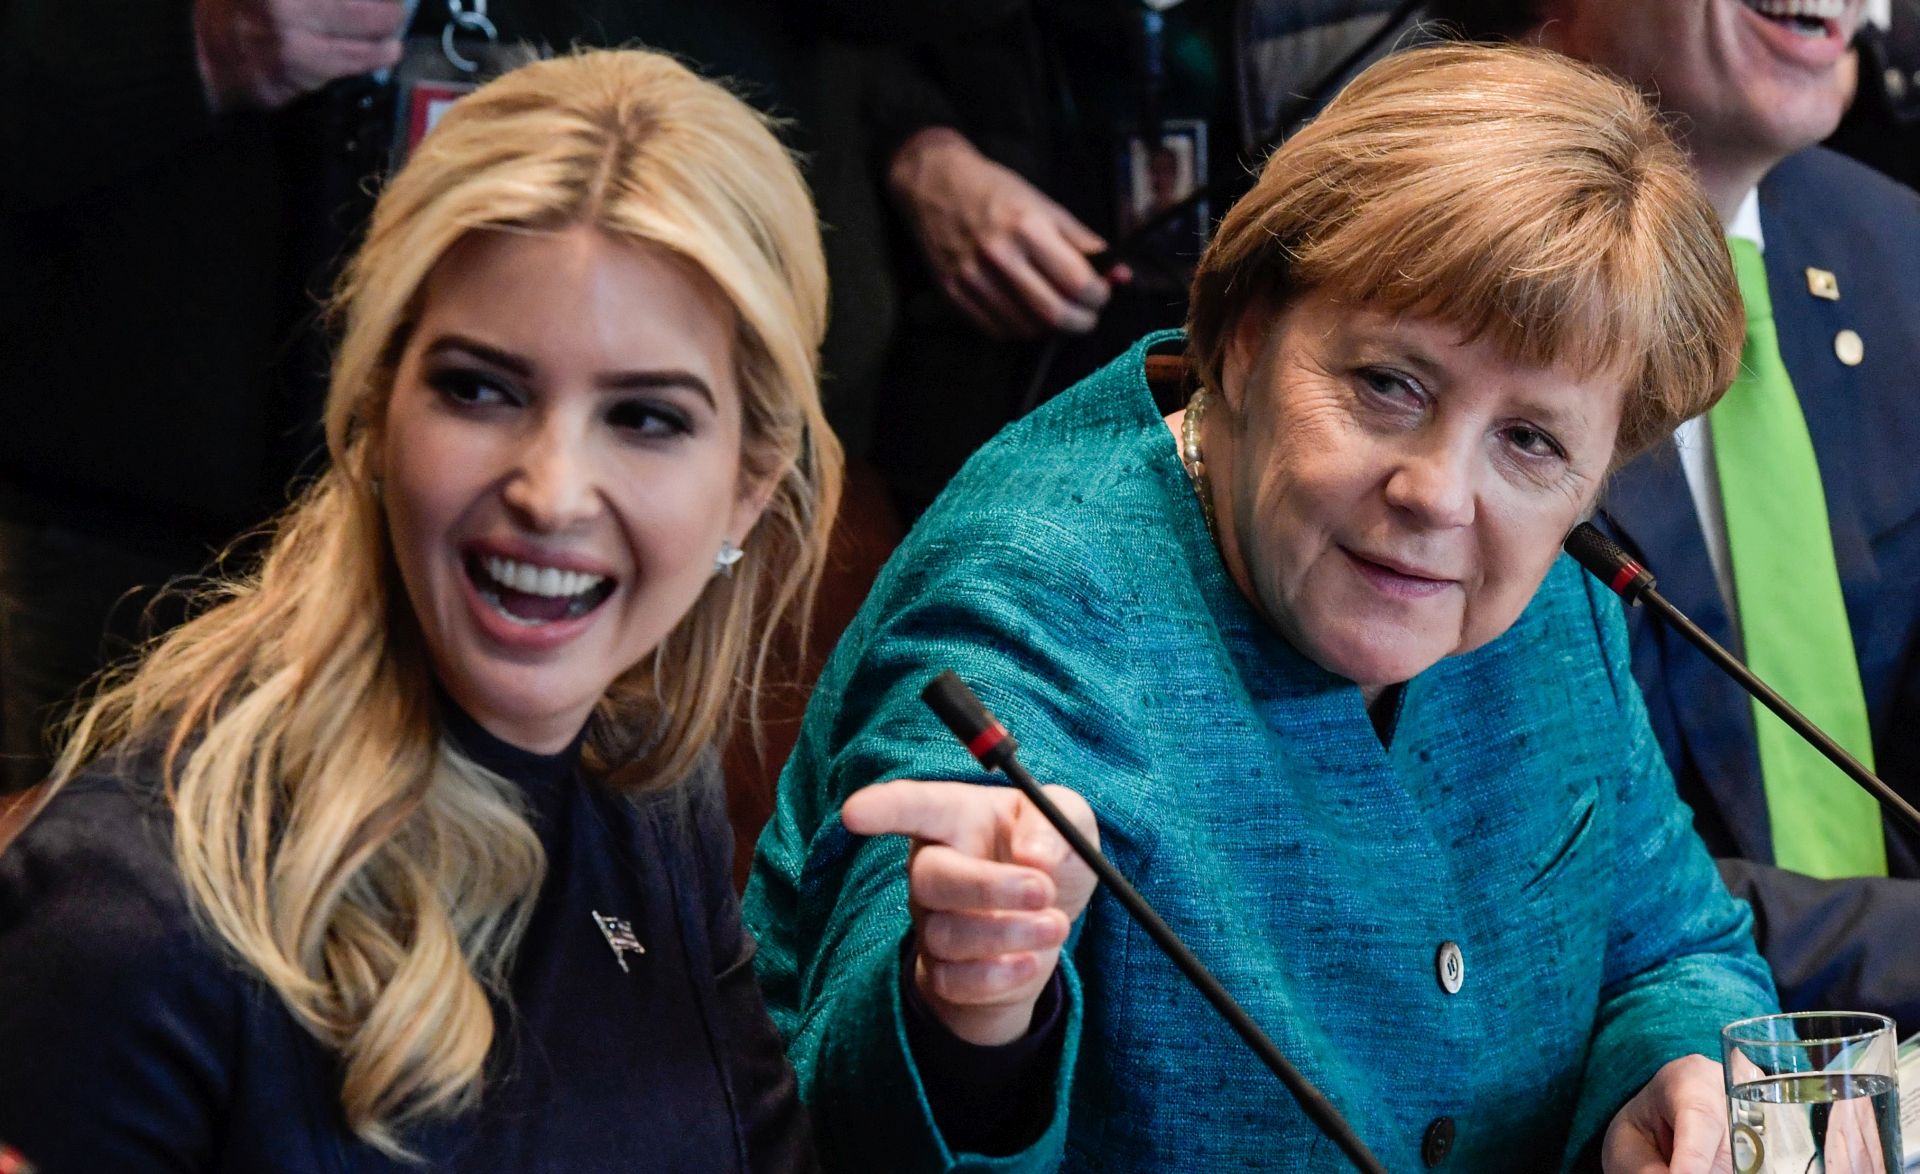 epa05854682 German Chancellor Angela Merkel (R) and Ivanka Trump attend joint discussion with business representatives at the White House in Washington, DC, USA, 17 March 2017. Merkel's original visit on 14 March had to be postponed due to bad weather.  EPA/CLEMENS BILAN